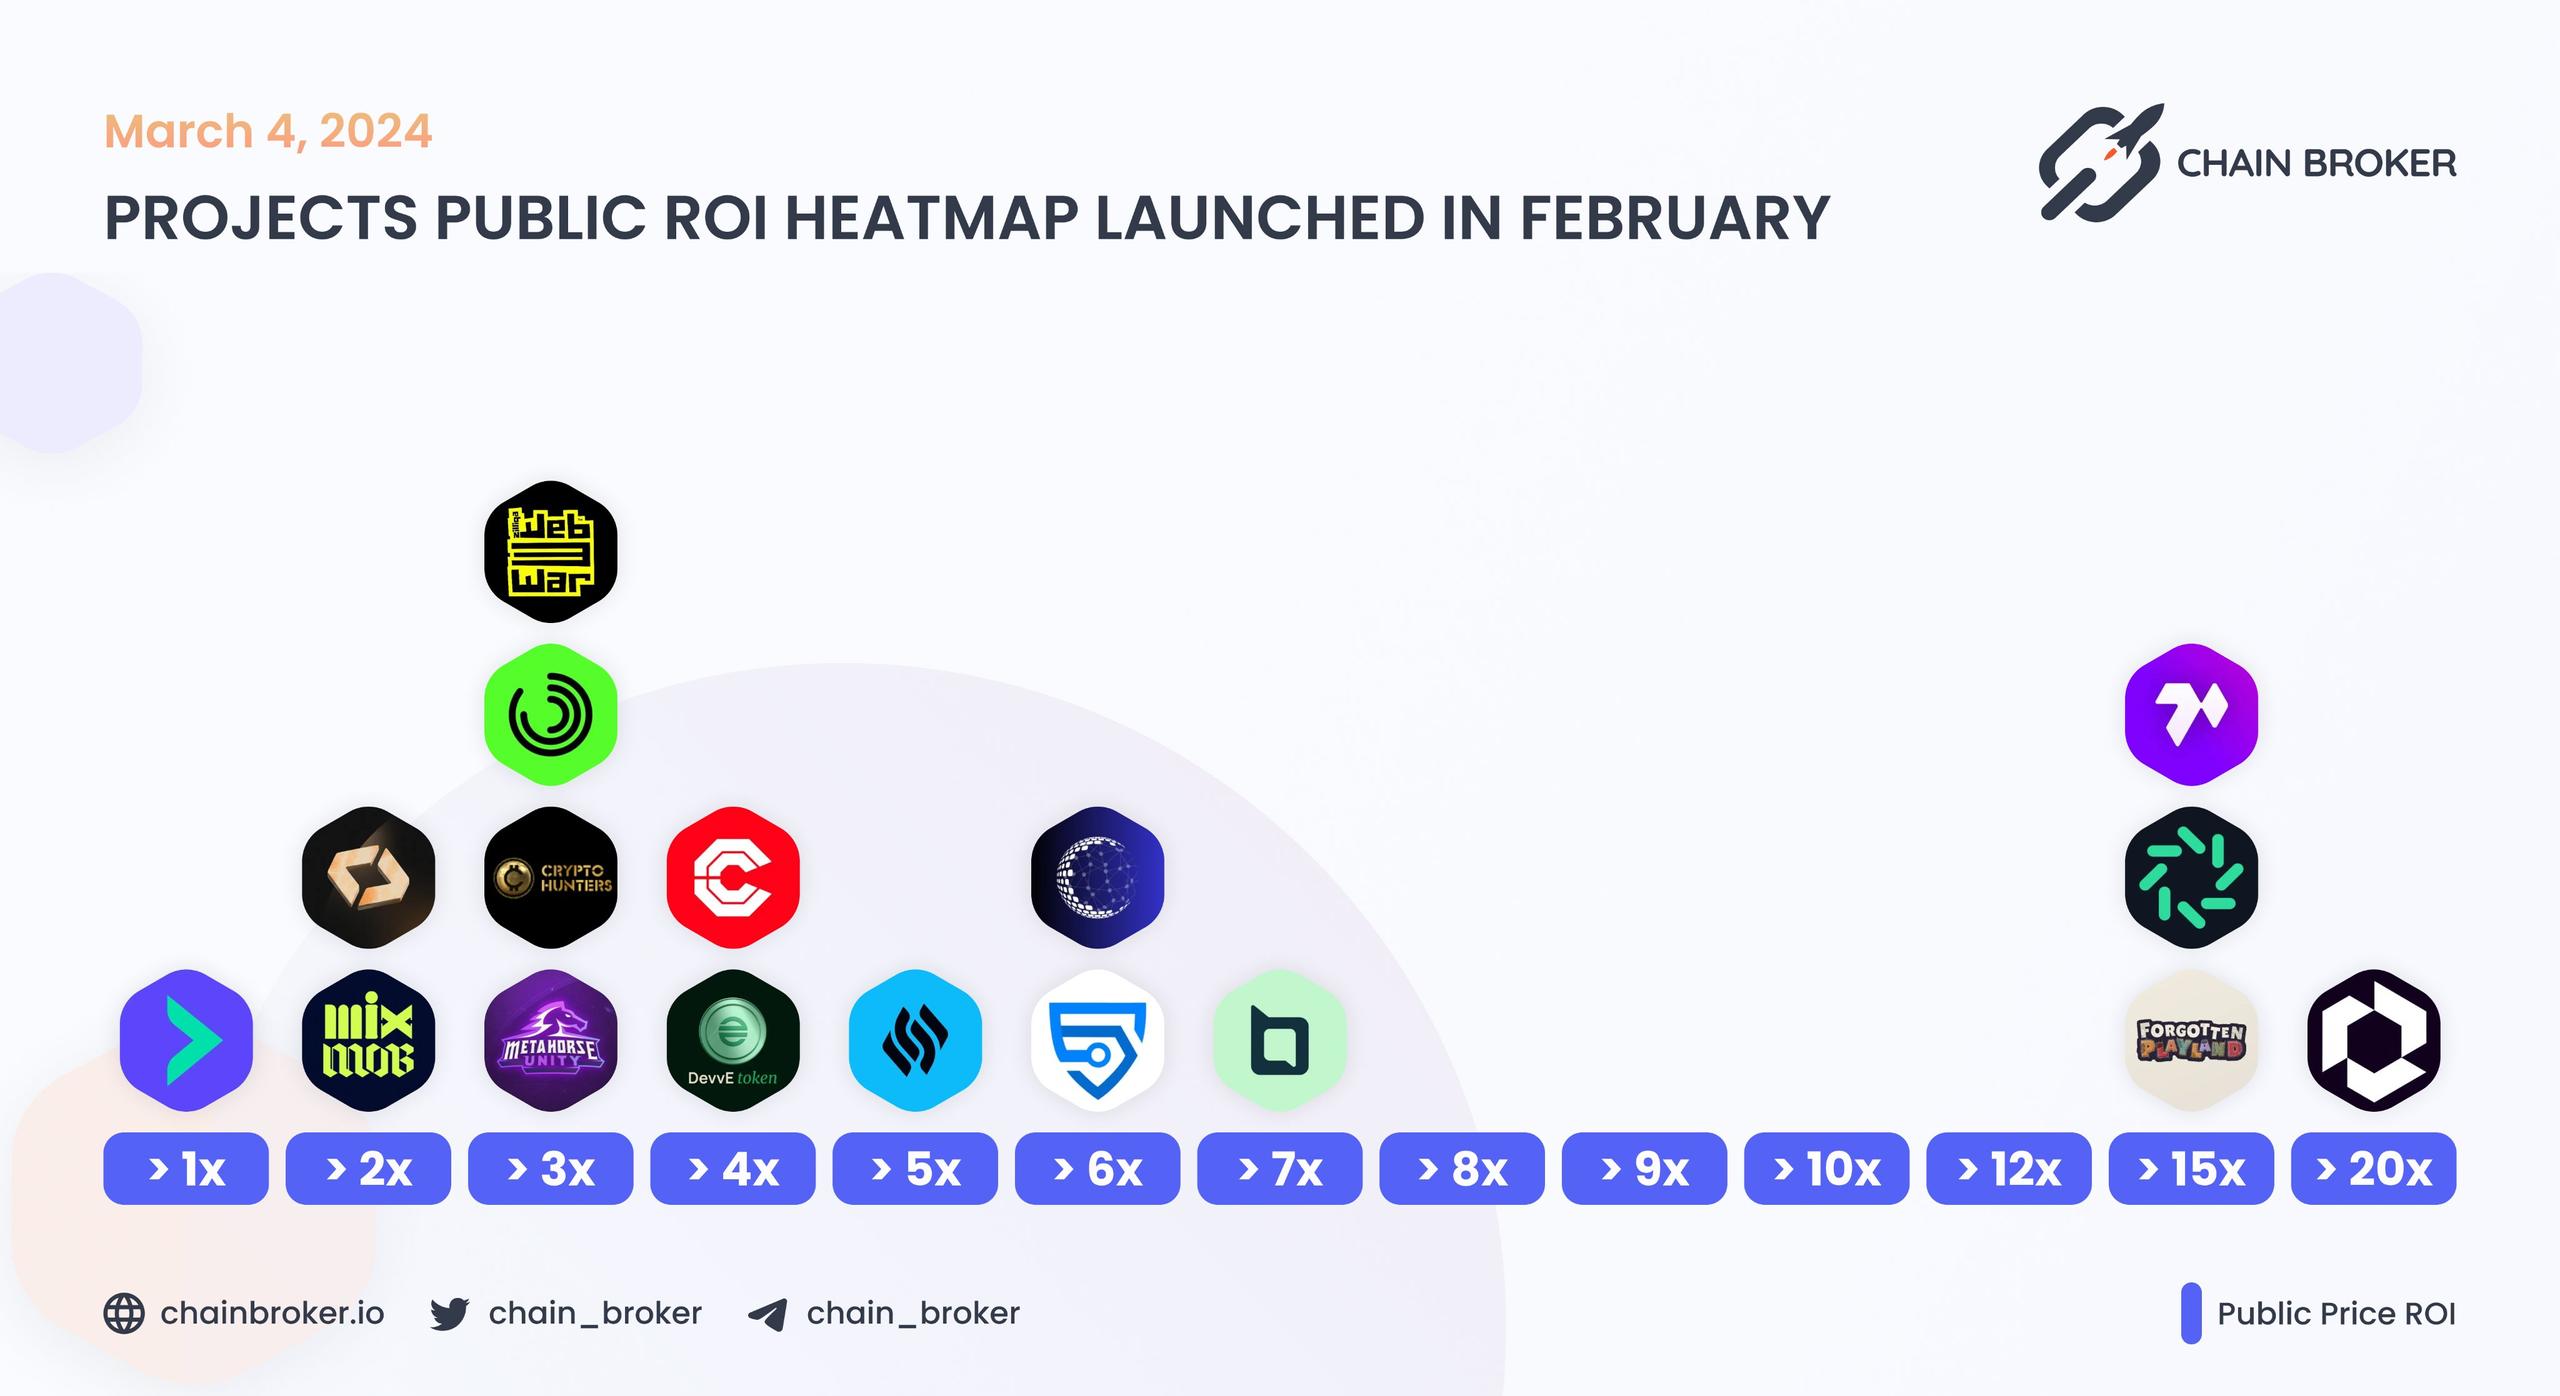 Projects public ROI heatmap launched in February